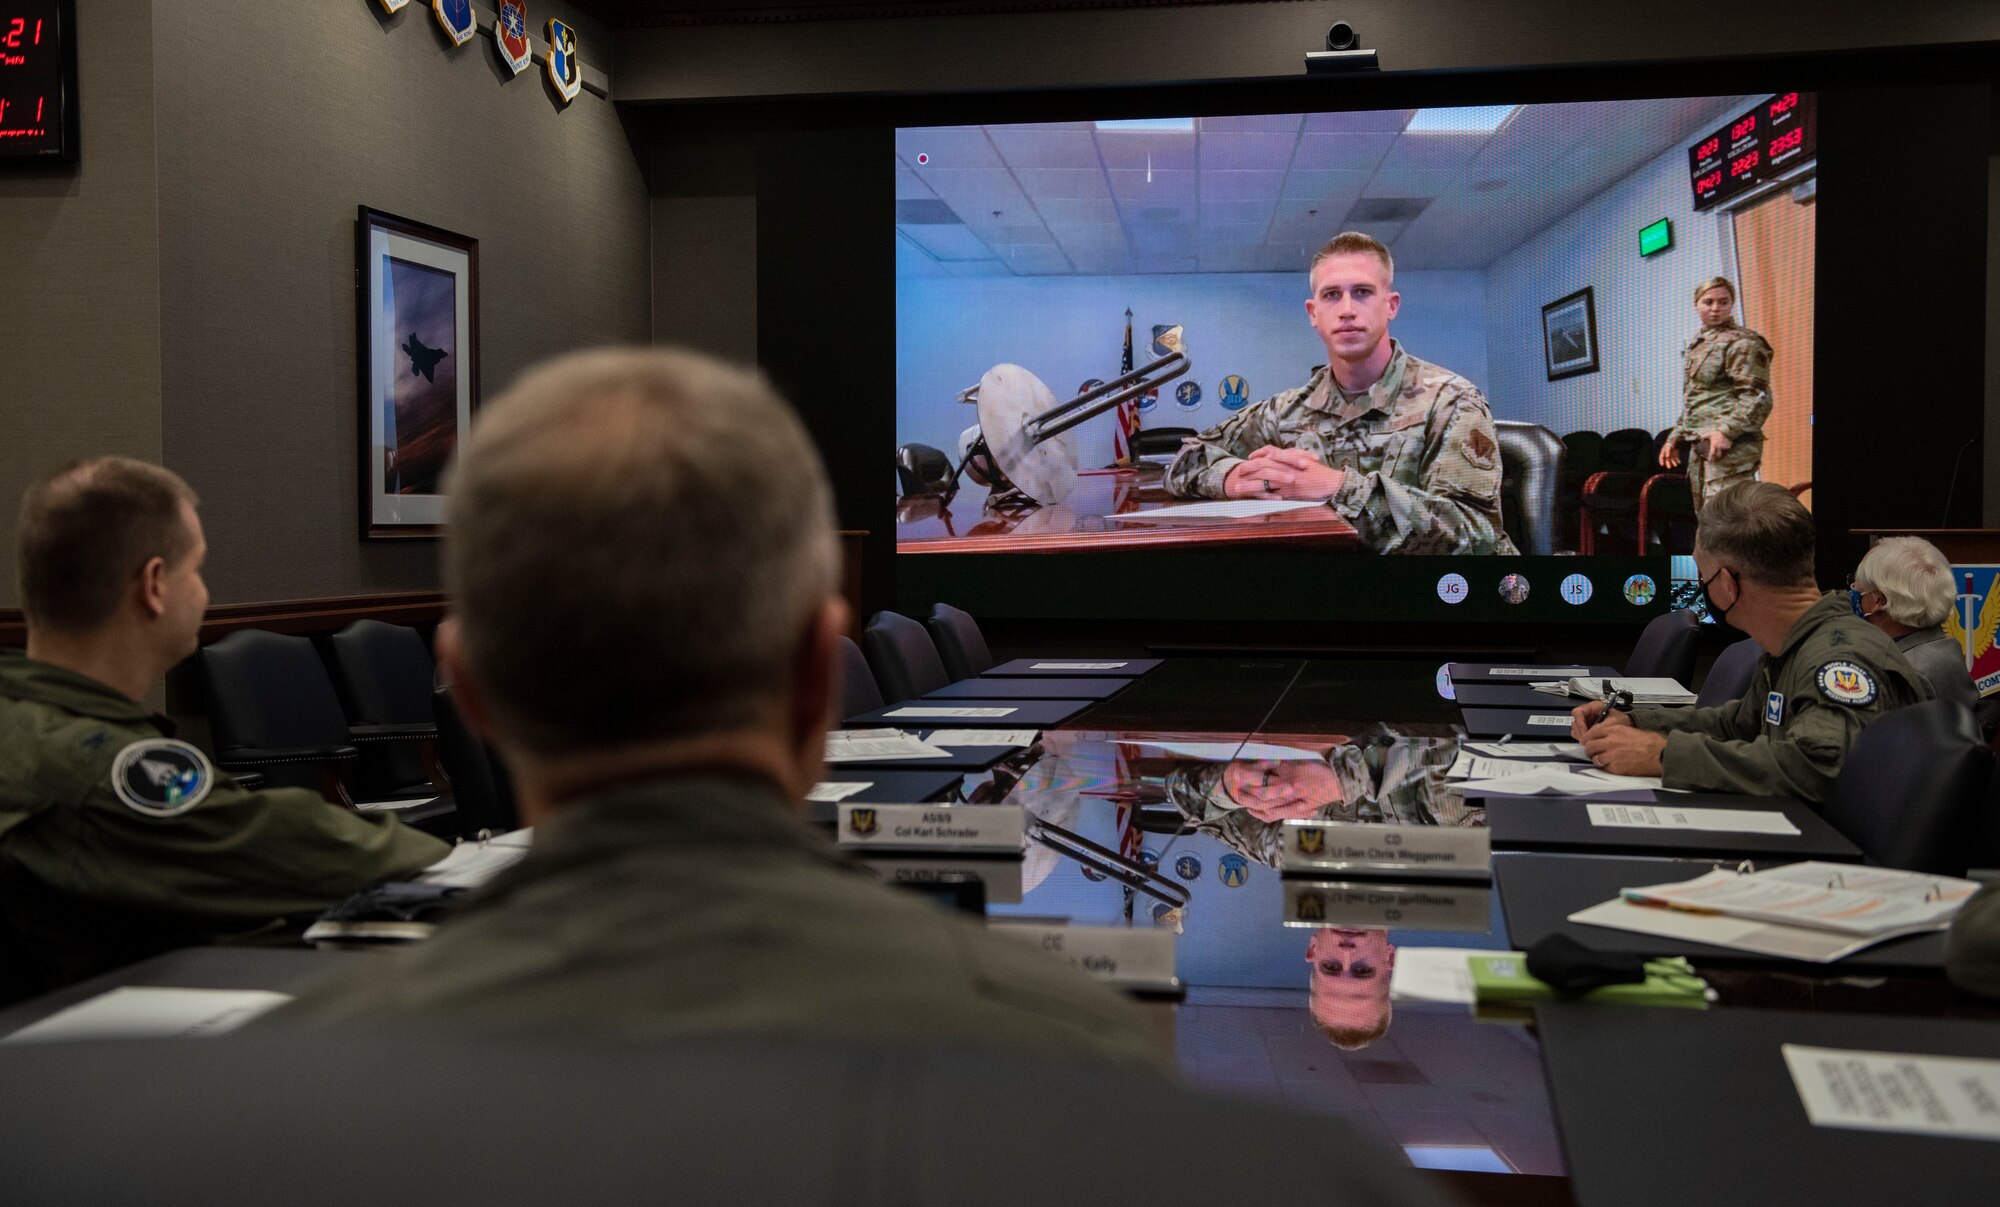 ACC 4 Star General sitting at table with screen in front of him